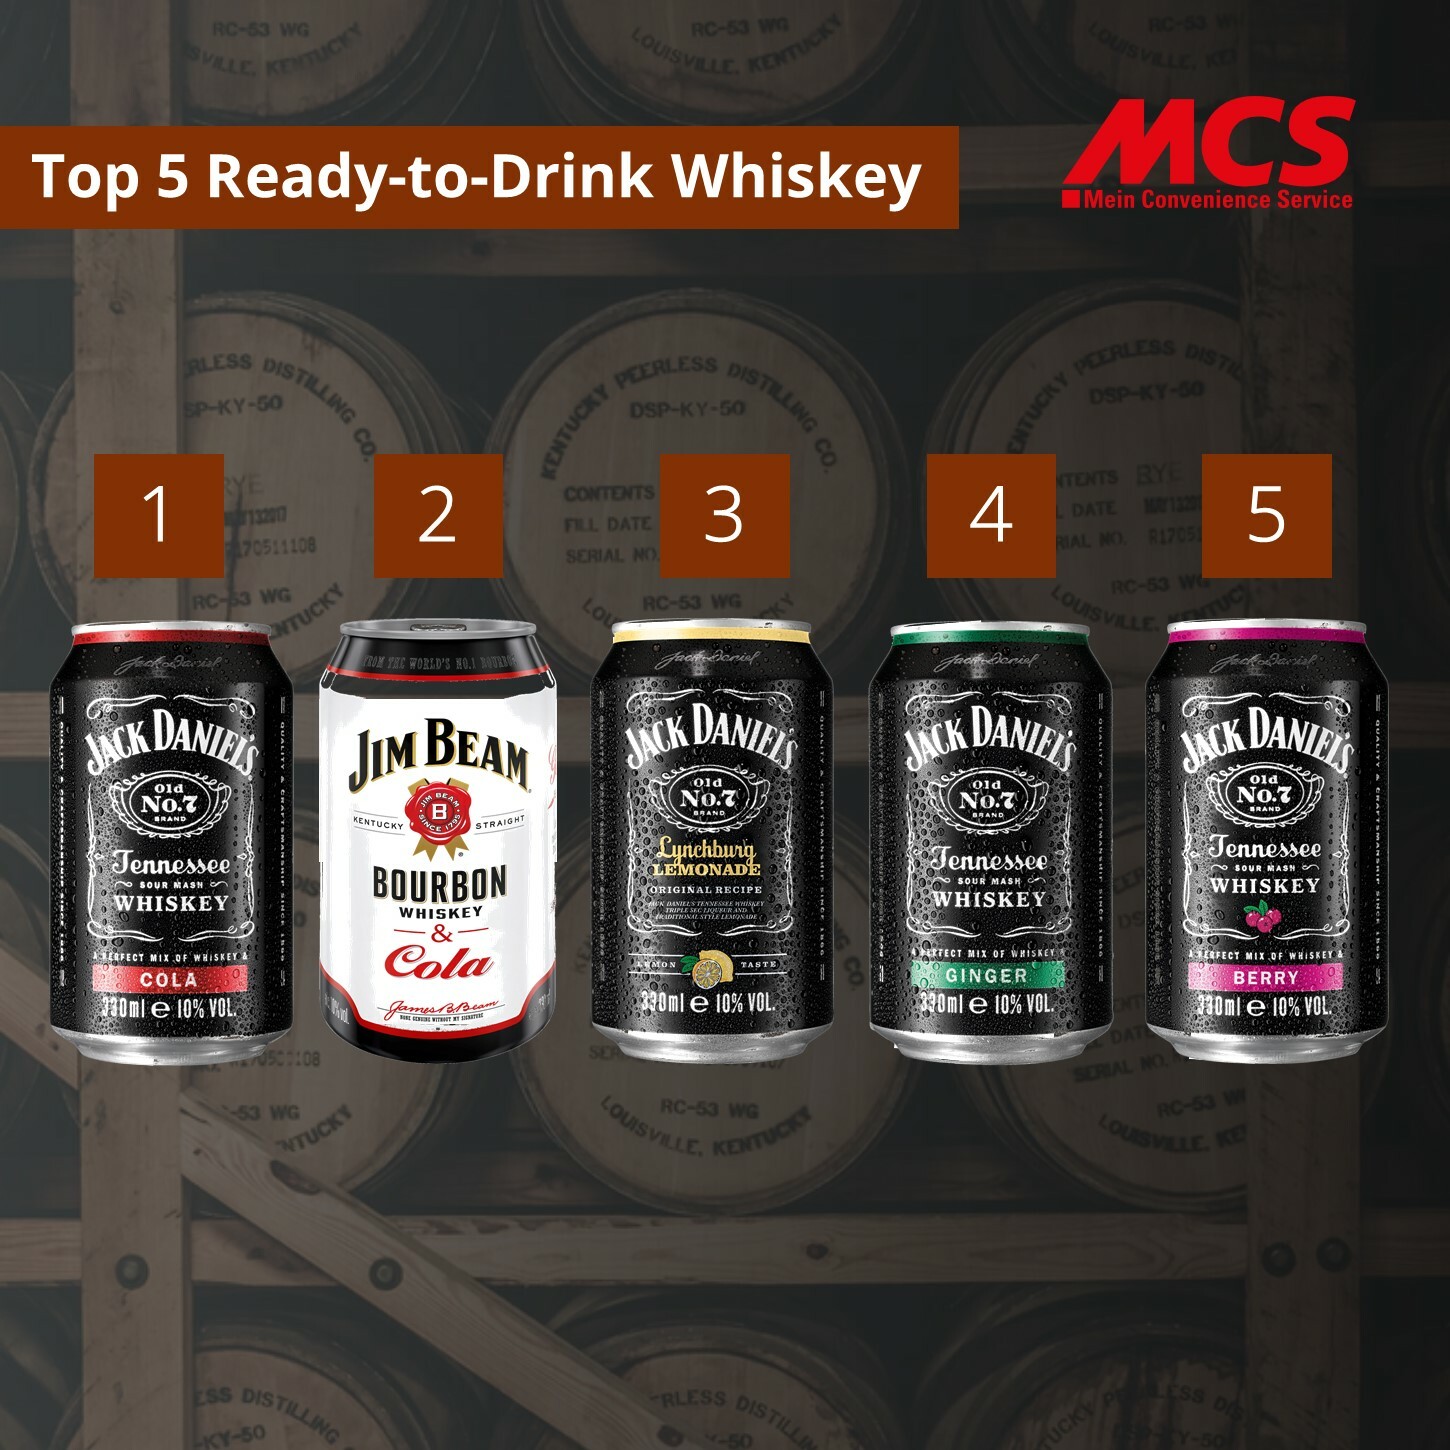 Ranking ready-to-Drink Whiskey